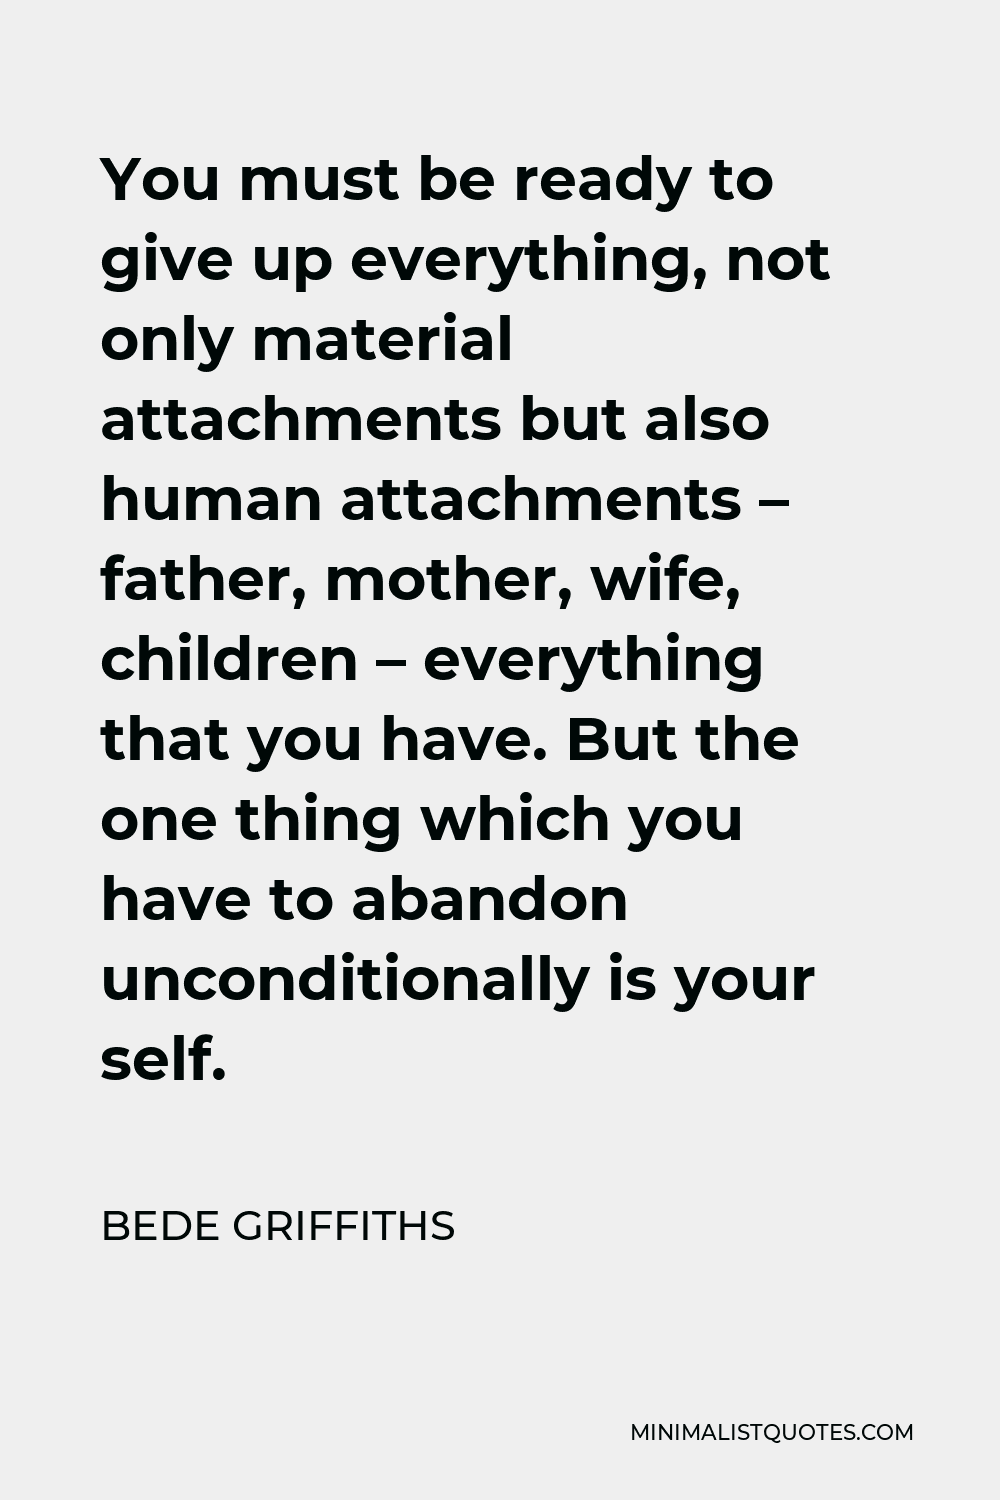 Bede Griffiths Quote - You must be ready to give up everything, not only material attachments but also human attachments – father, mother, wife, children – everything that you have. But the one thing which you have to abandon unconditionally is your self.